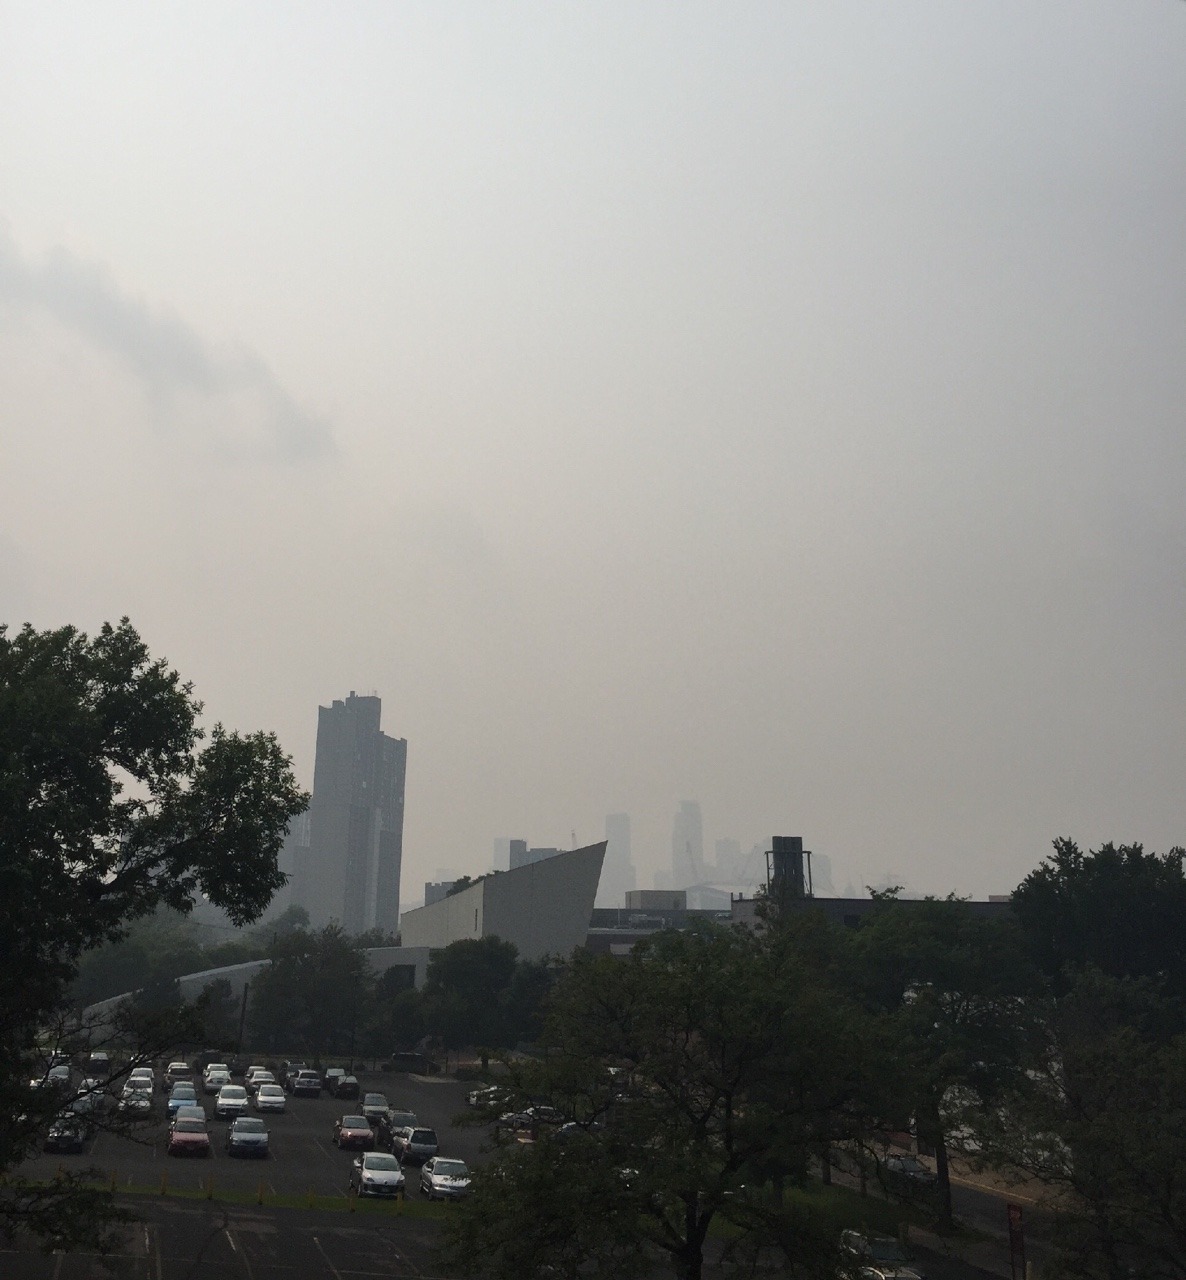 around 2:30pm on that day a few weeks back in Minneapolis when all the smoke was